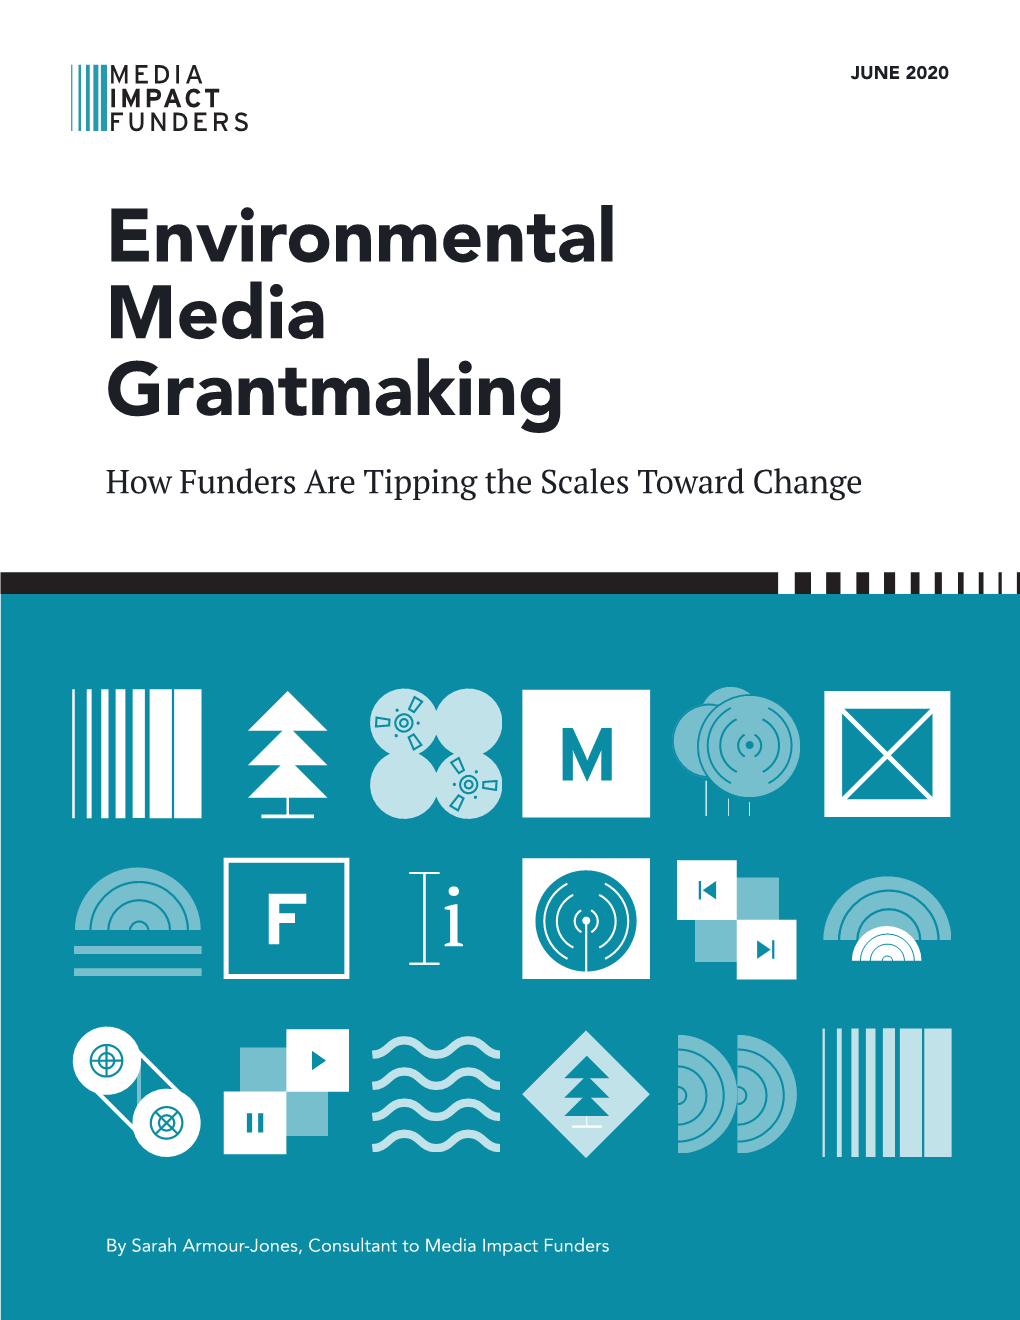 Environmental Media Grantmaking How Funders Are Tipping the Scales Toward Change